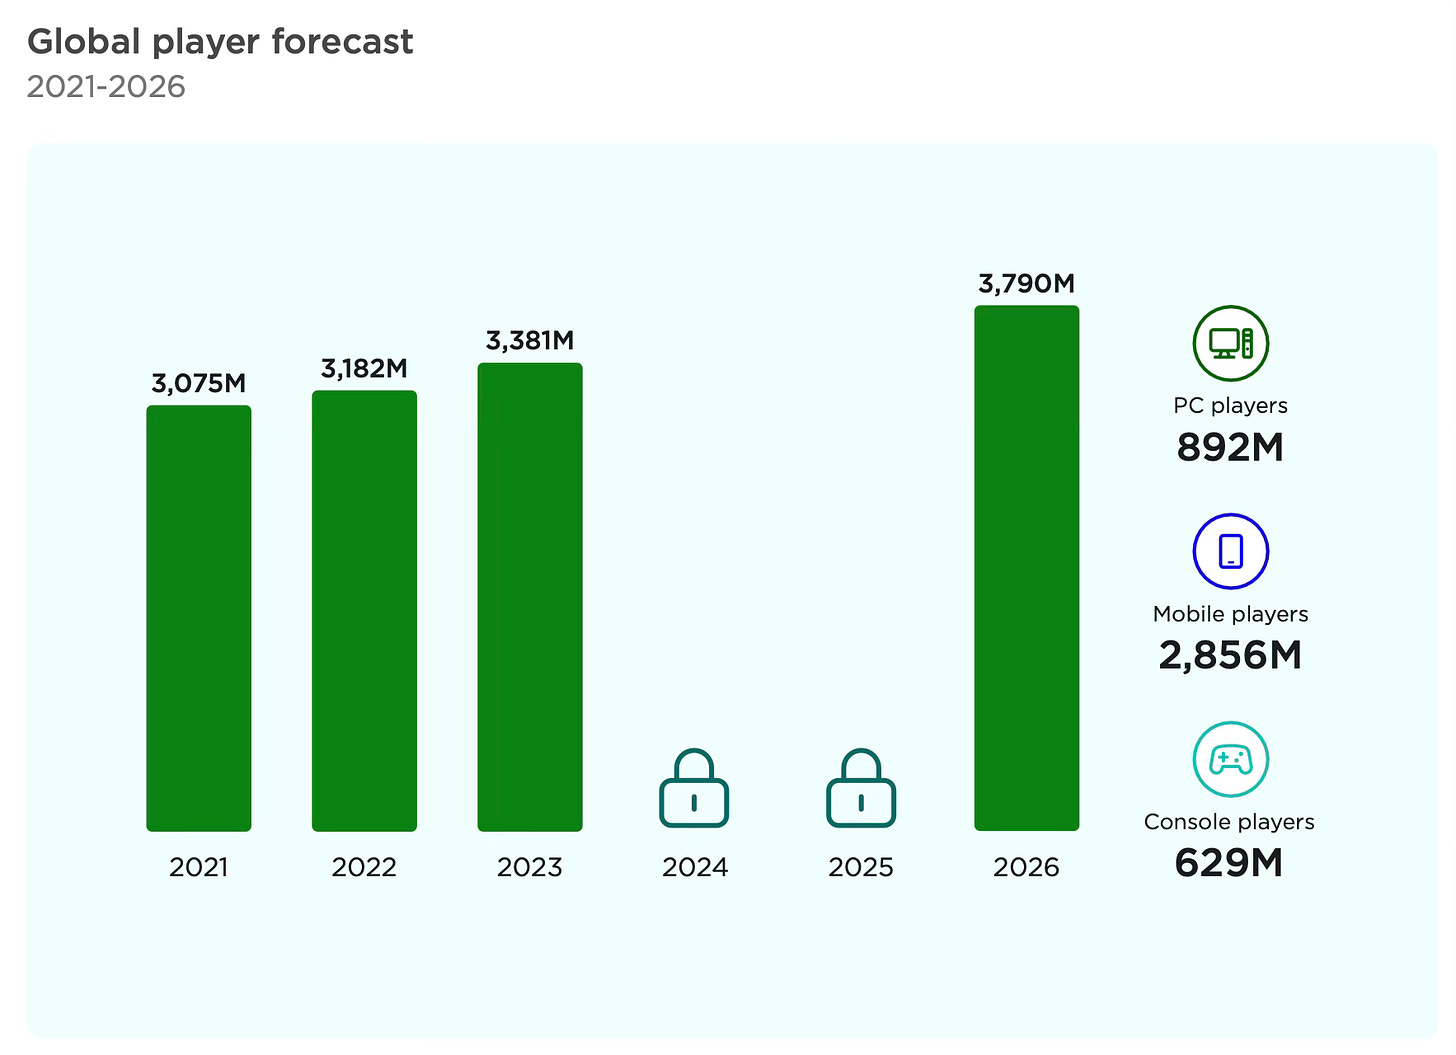 Global player forecast 2026